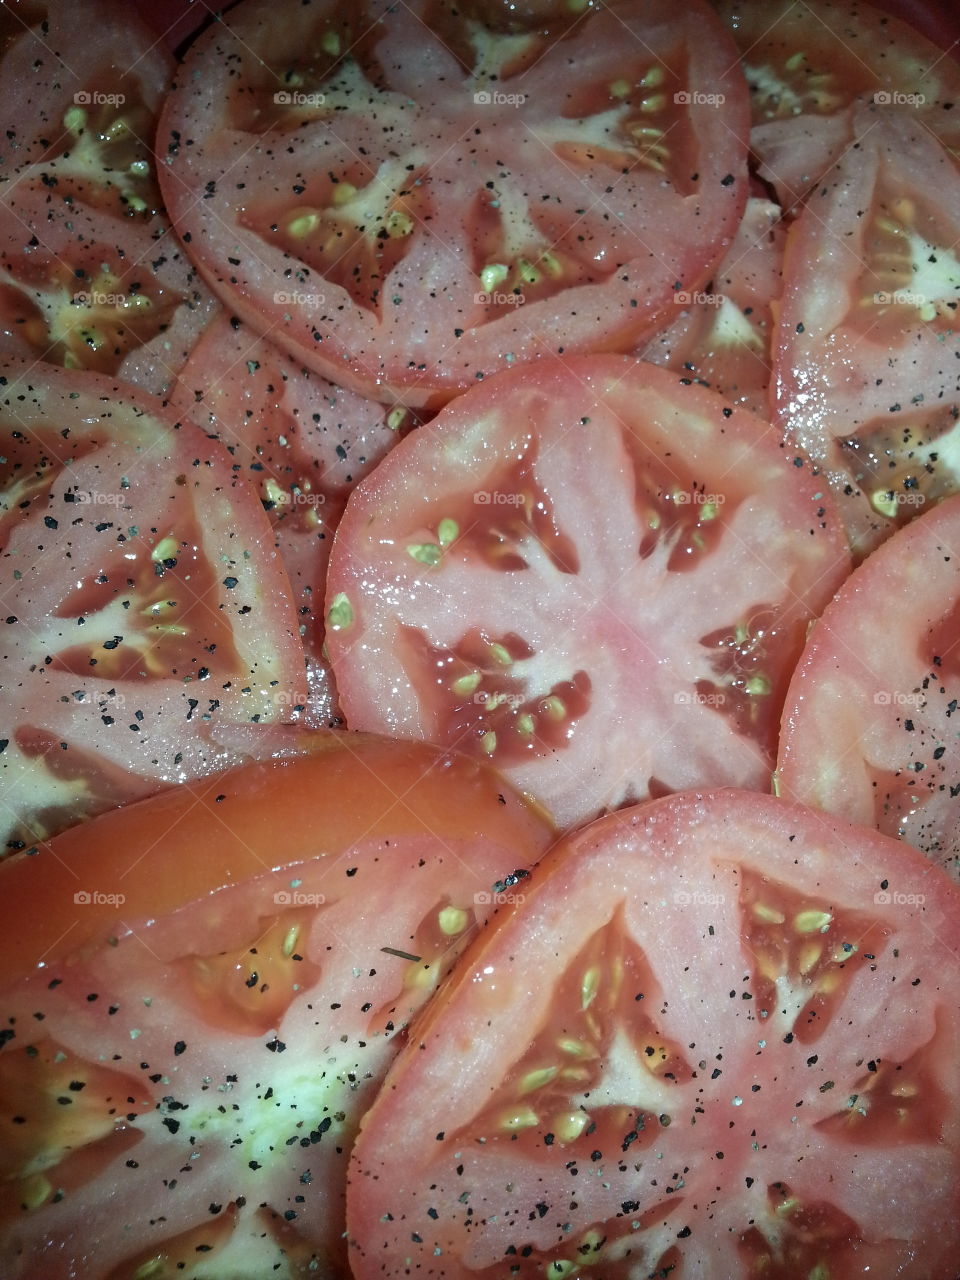 Tomatoes with salt and pepper. my lunch today